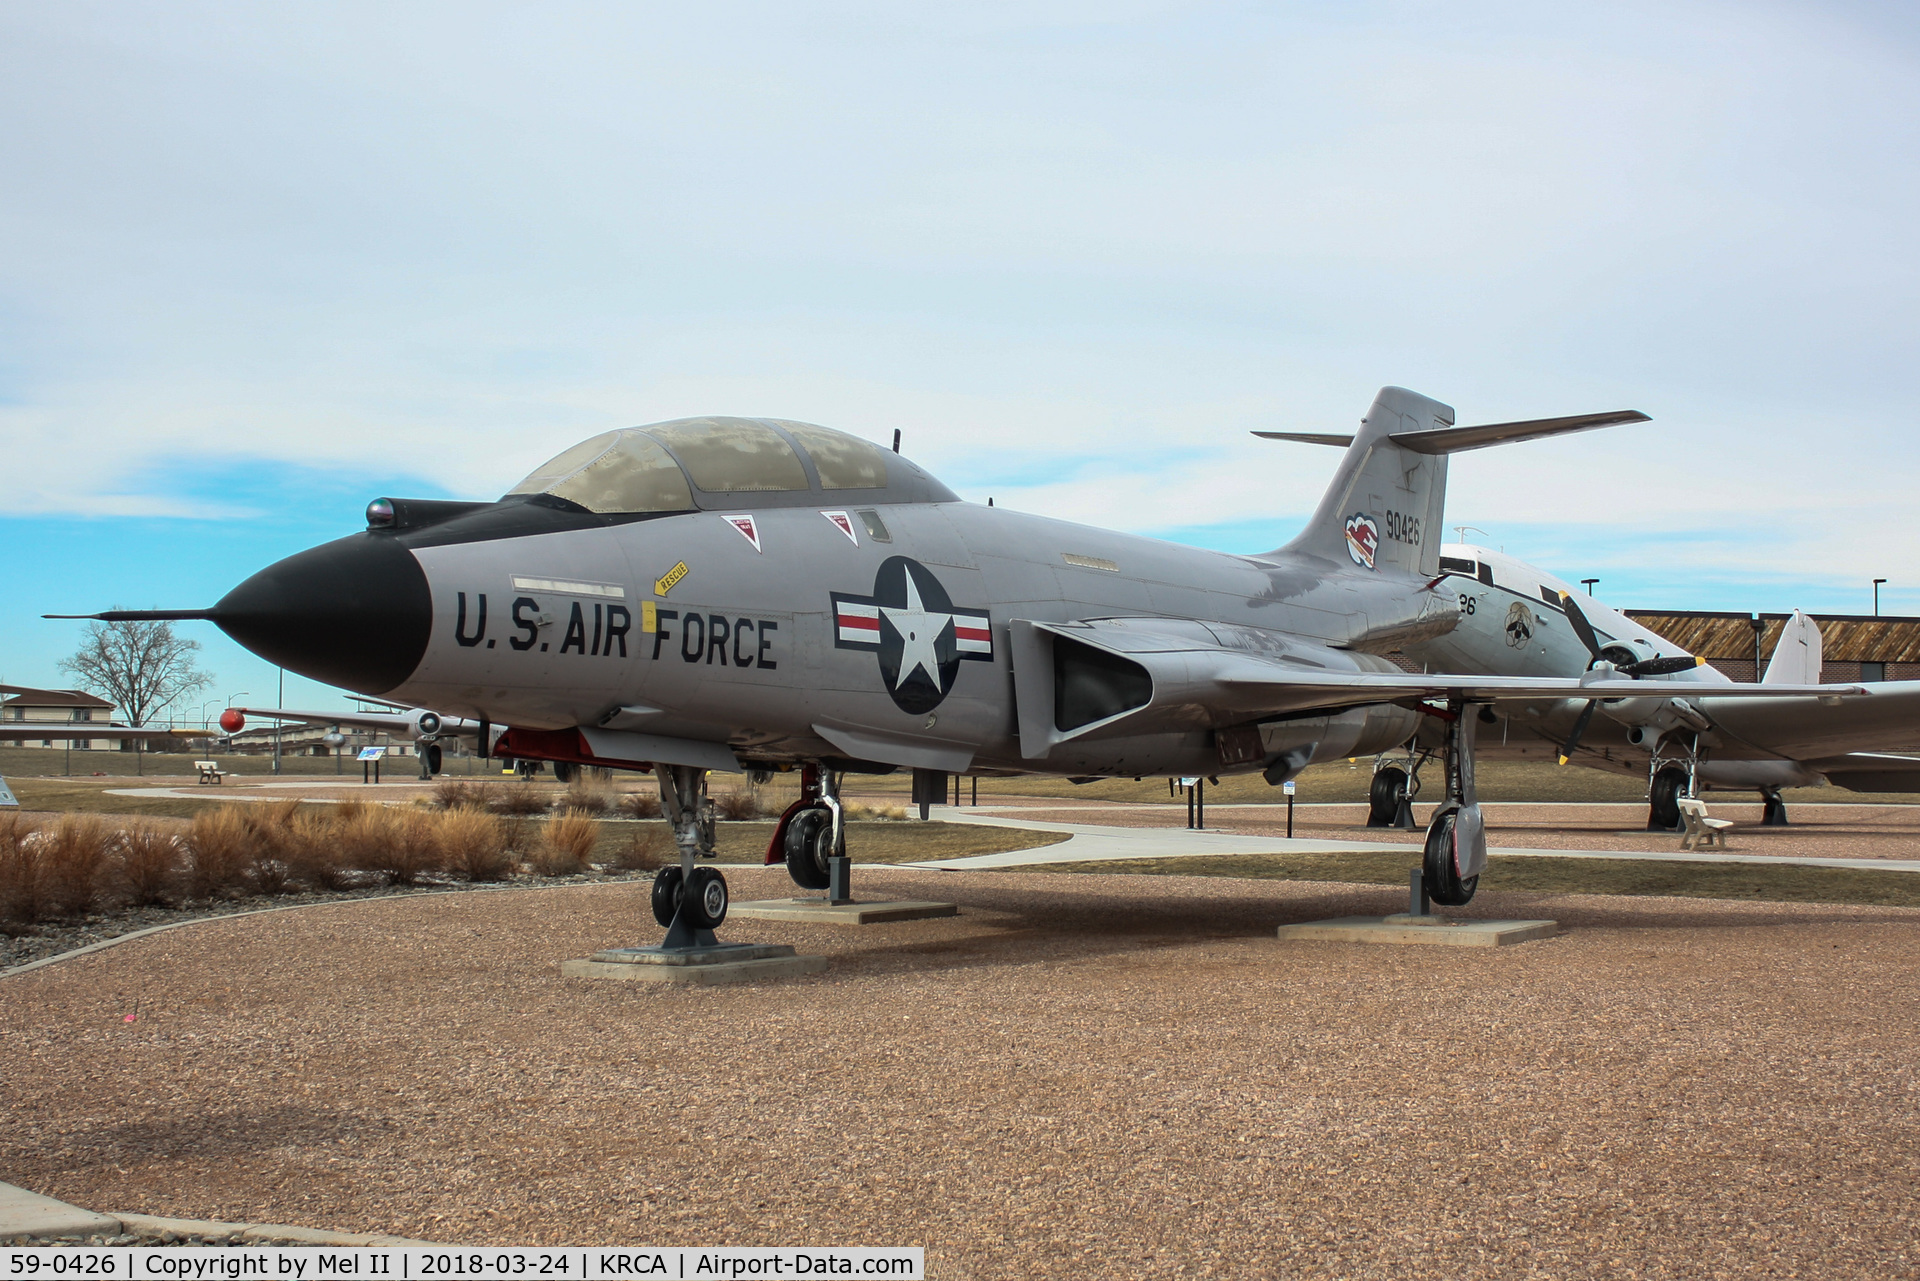 59-0426, 1959 McDonnell F-101B-115-MC Voodoo C/N 750, On display at the South Dakota Air and Space Museum at Ellsworth Air Force Base.